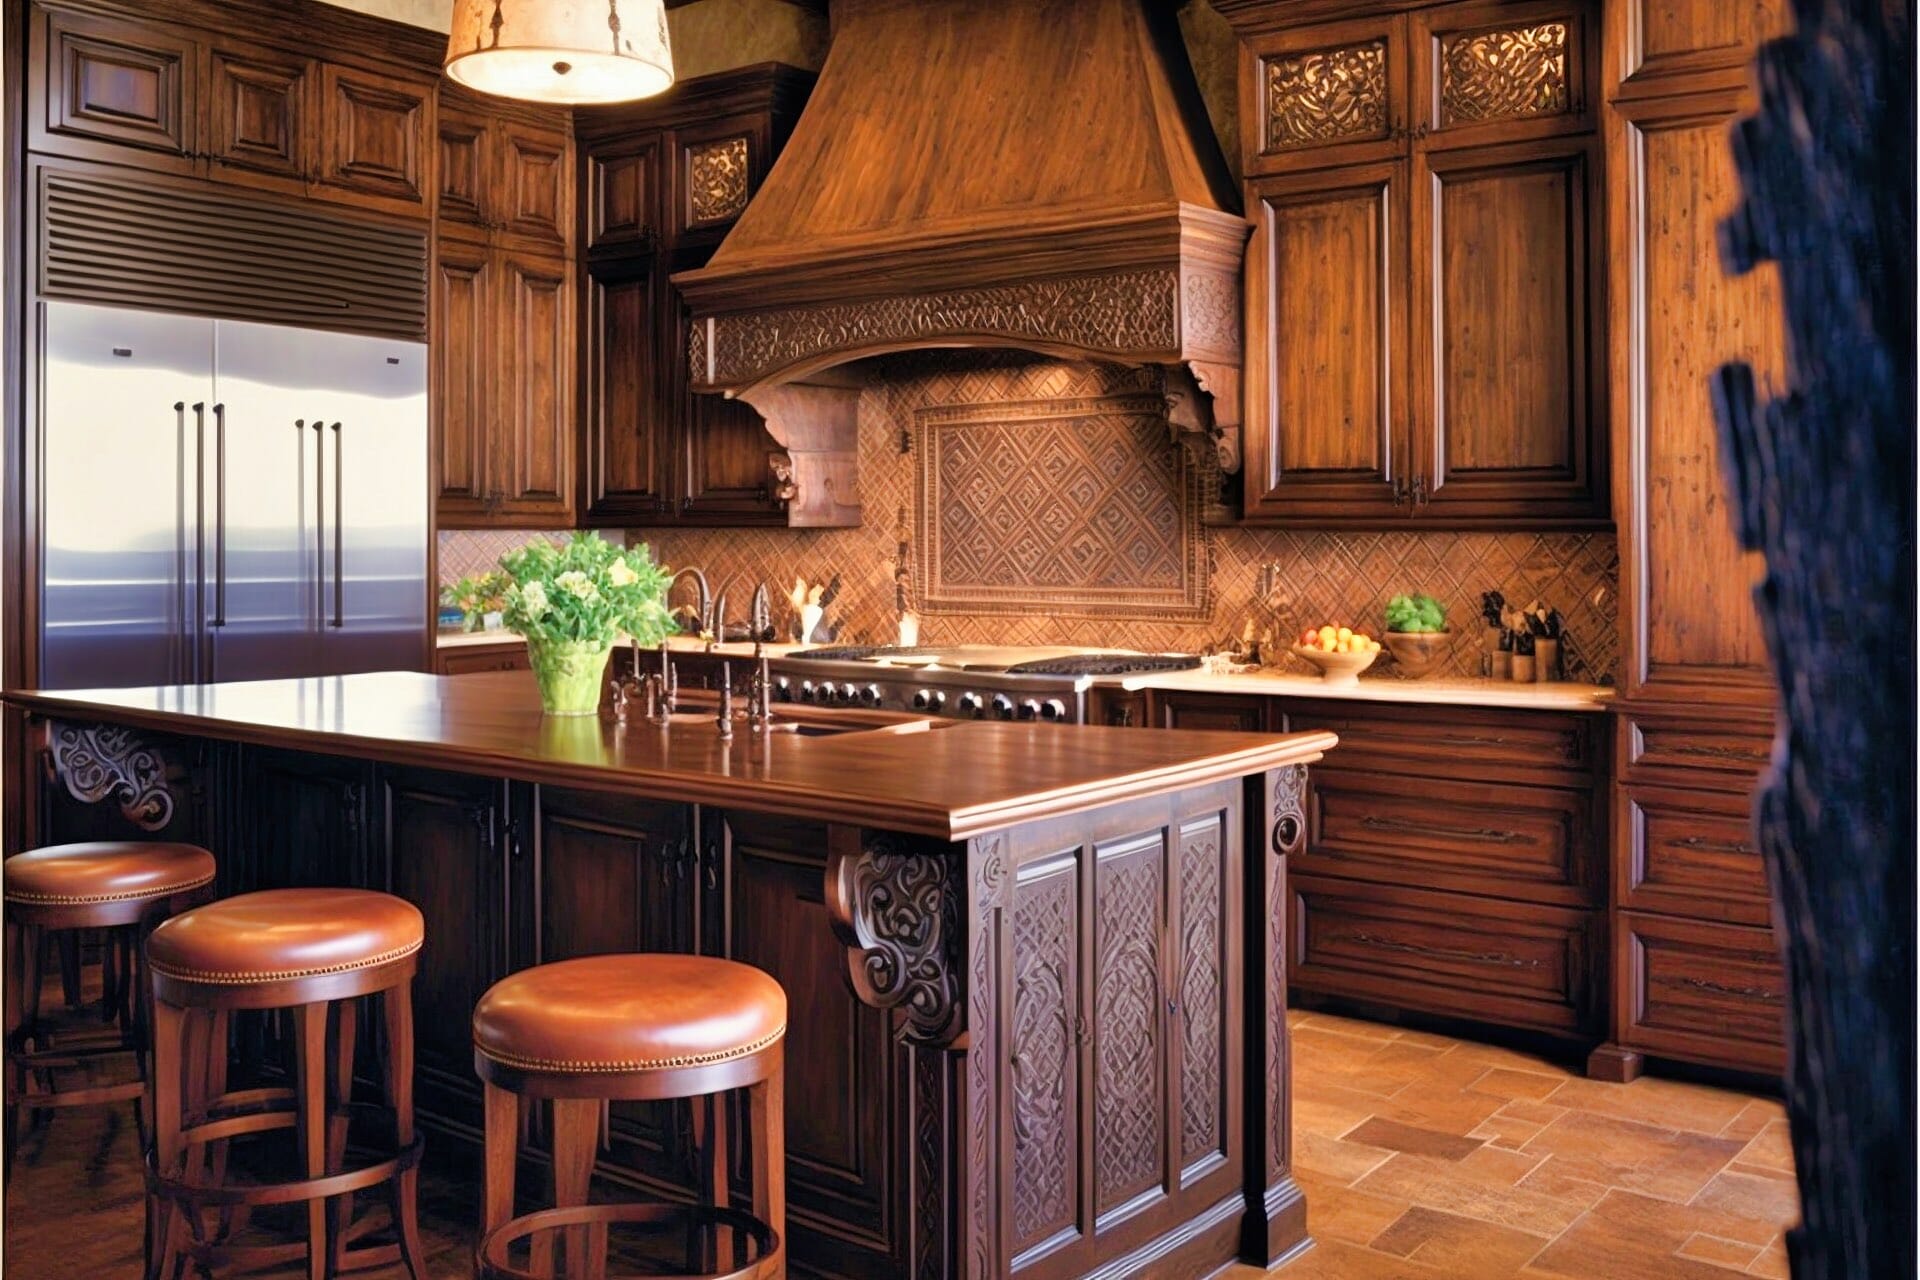 This Grand Kitchen Features A Rustic Design With Sophisticated Flair. Dark Oak Cabinetry Is Complemented By A Decorative Tile Backsplash And Expansive Island, Providing Considerable Space For Culinary Pursuits.